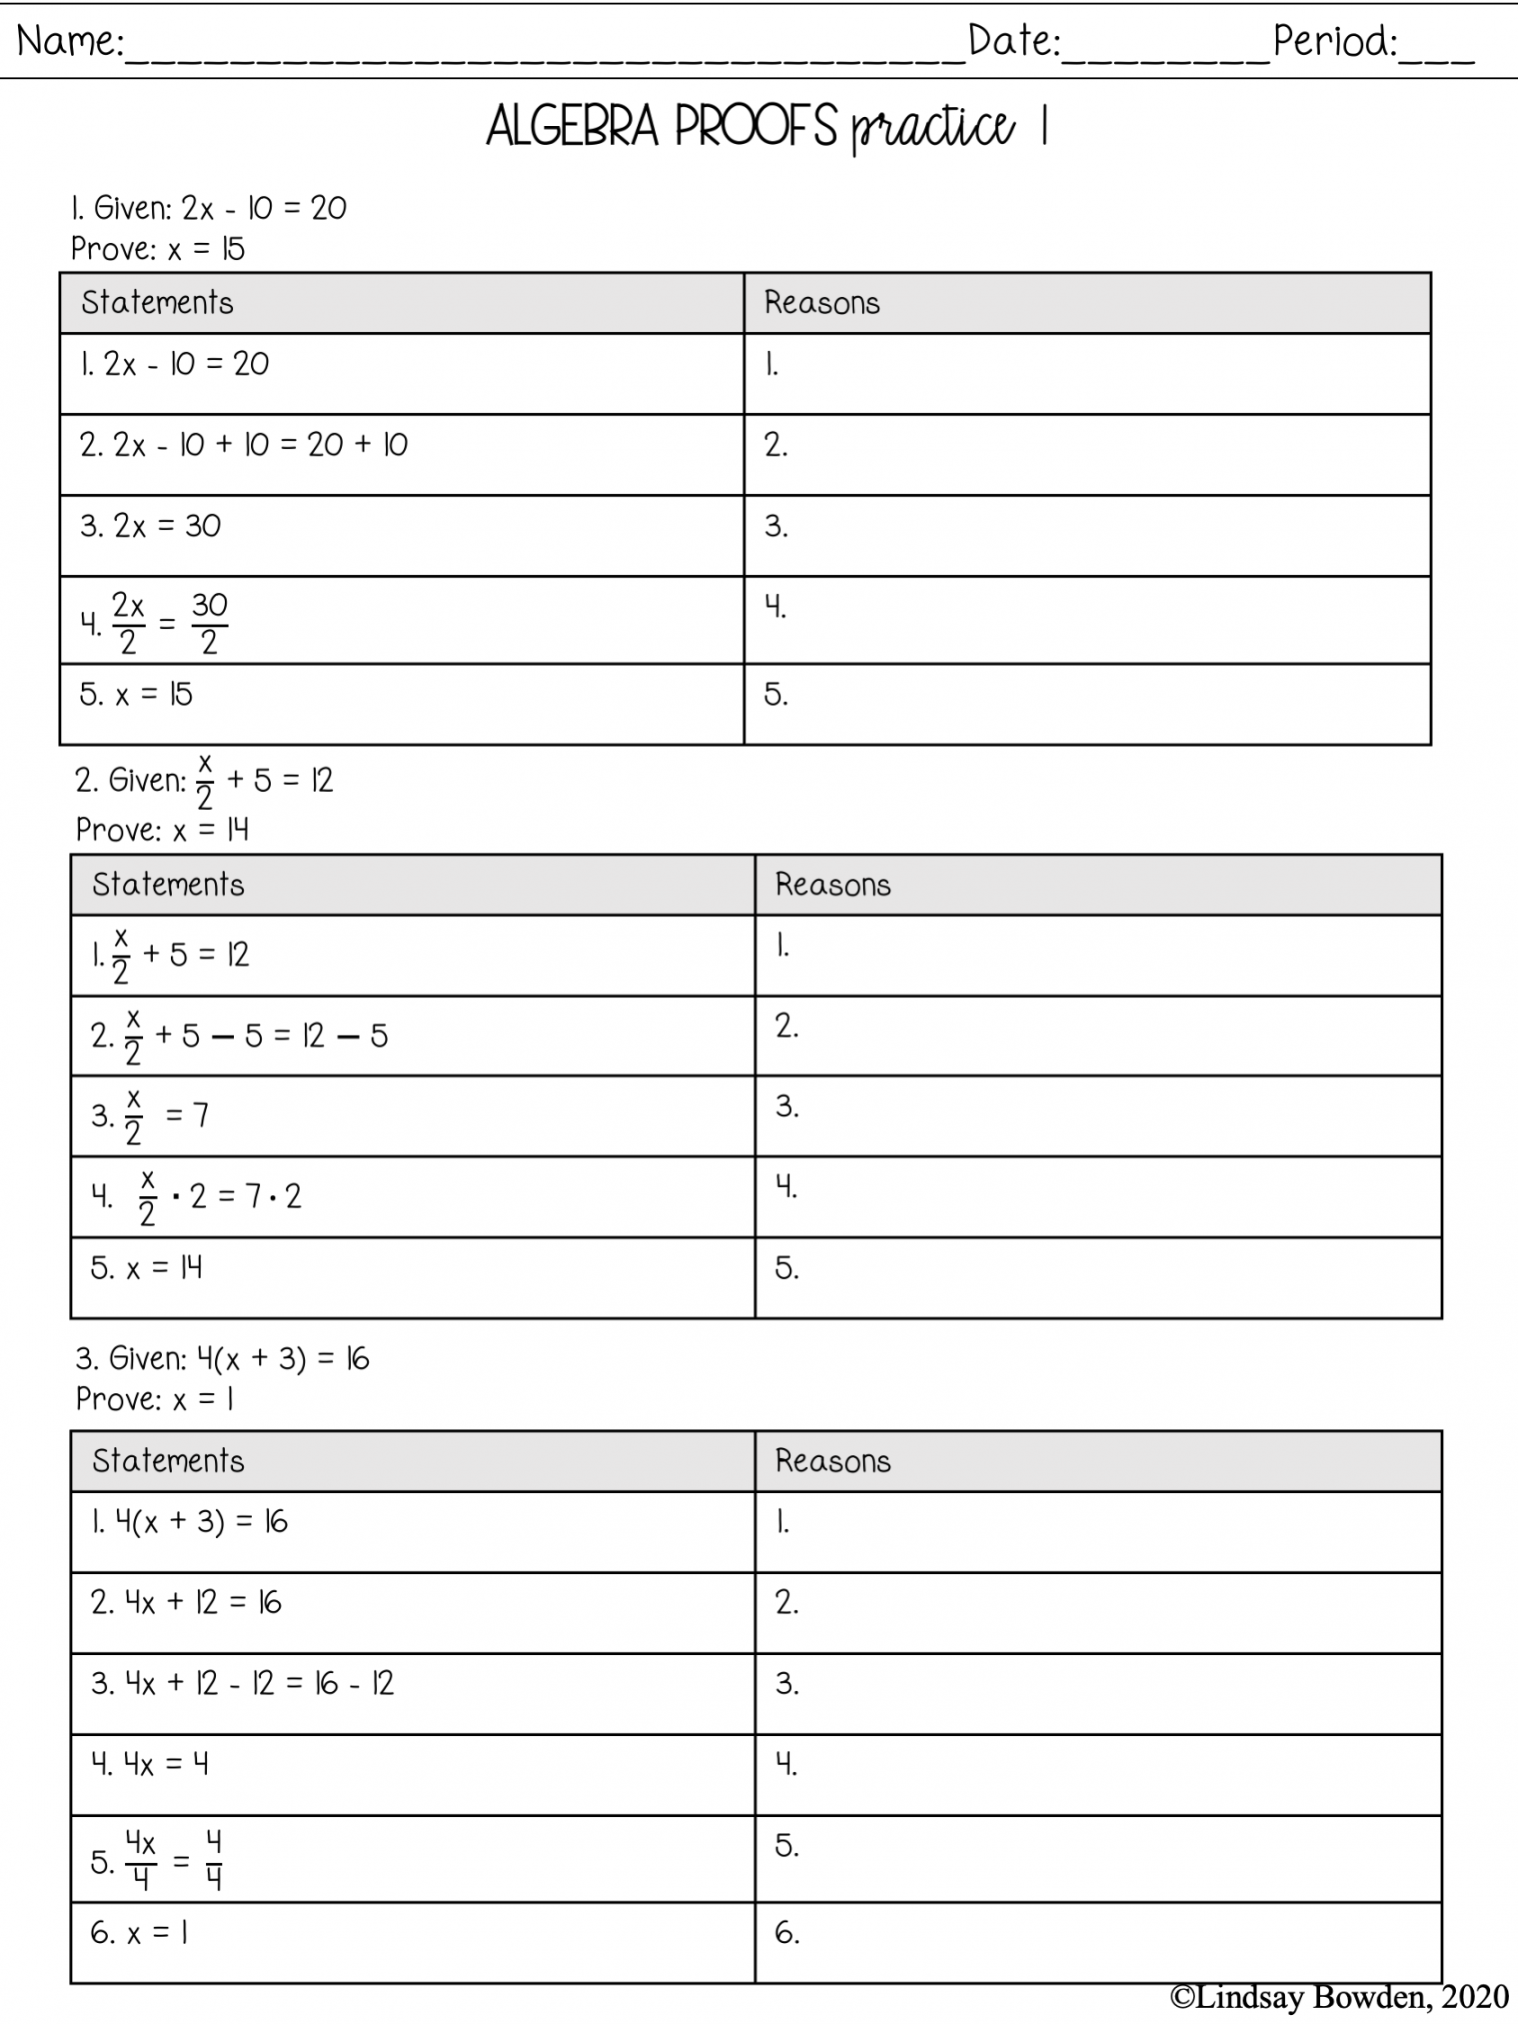 Algebra Proofs Notes and Worksheets - Lindsay Bowden